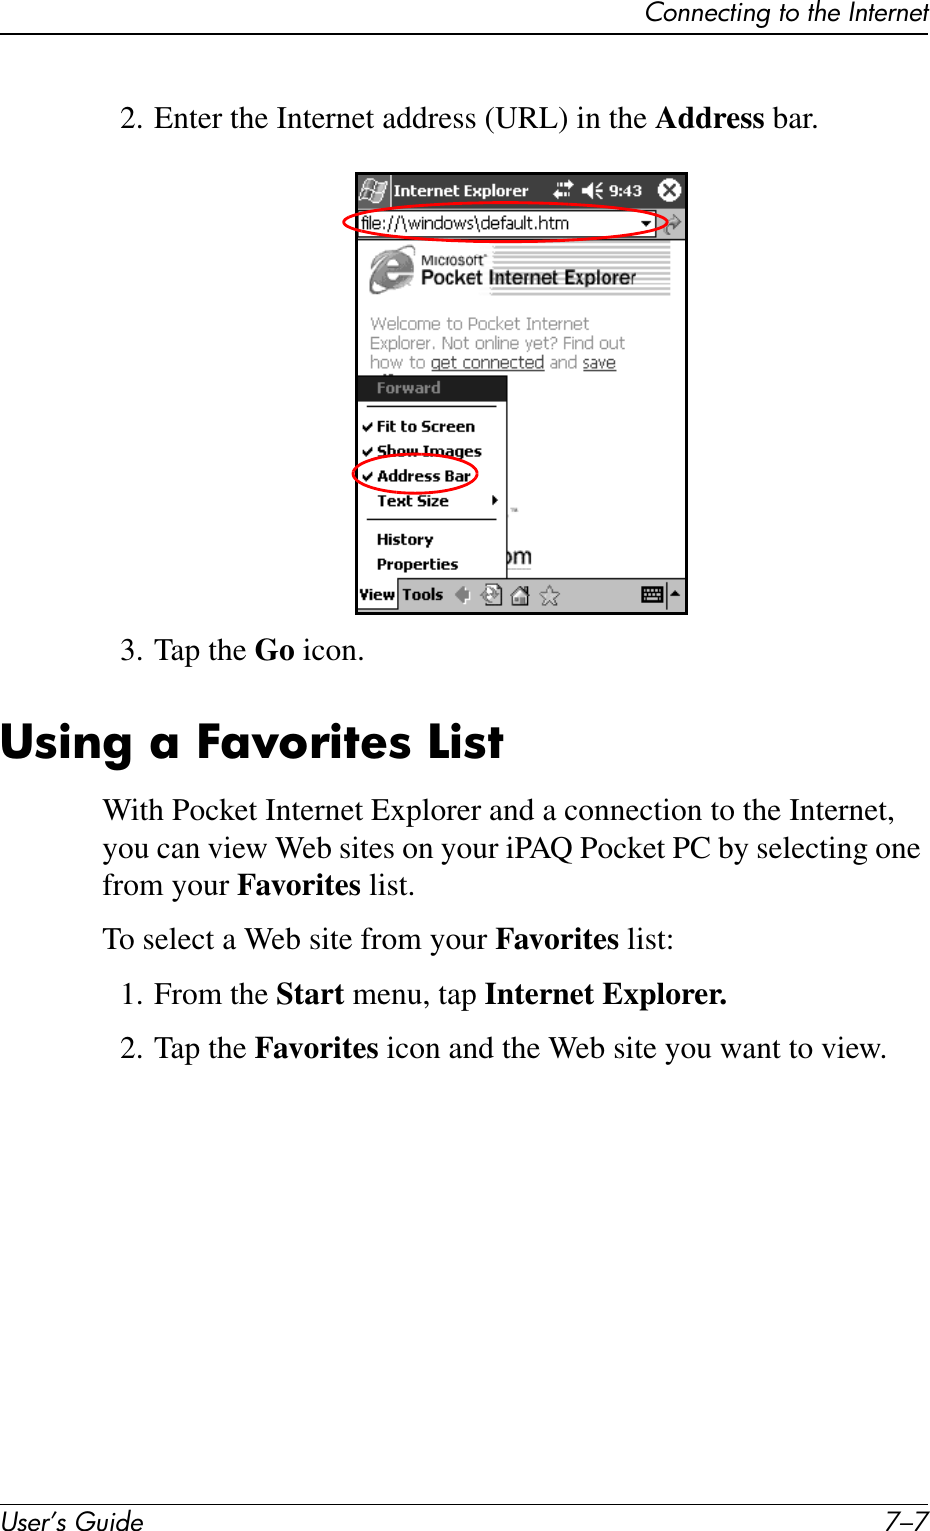 Connecting to the InternetUser’s Guide 7–72. Enter the Internet address (URL) in the Address bar.3. Tap the Go icon.Using a Favorites ListWith Pocket Internet Explorer and a connection to the Internet, you can view Web sites on your iPAQ Pocket PC by selecting one from your Favorites list.To select a Web site from your Favorites list:1. From the Start menu, tap Internet Explorer.2. Tap the Favorites icon and the Web site you want to view.